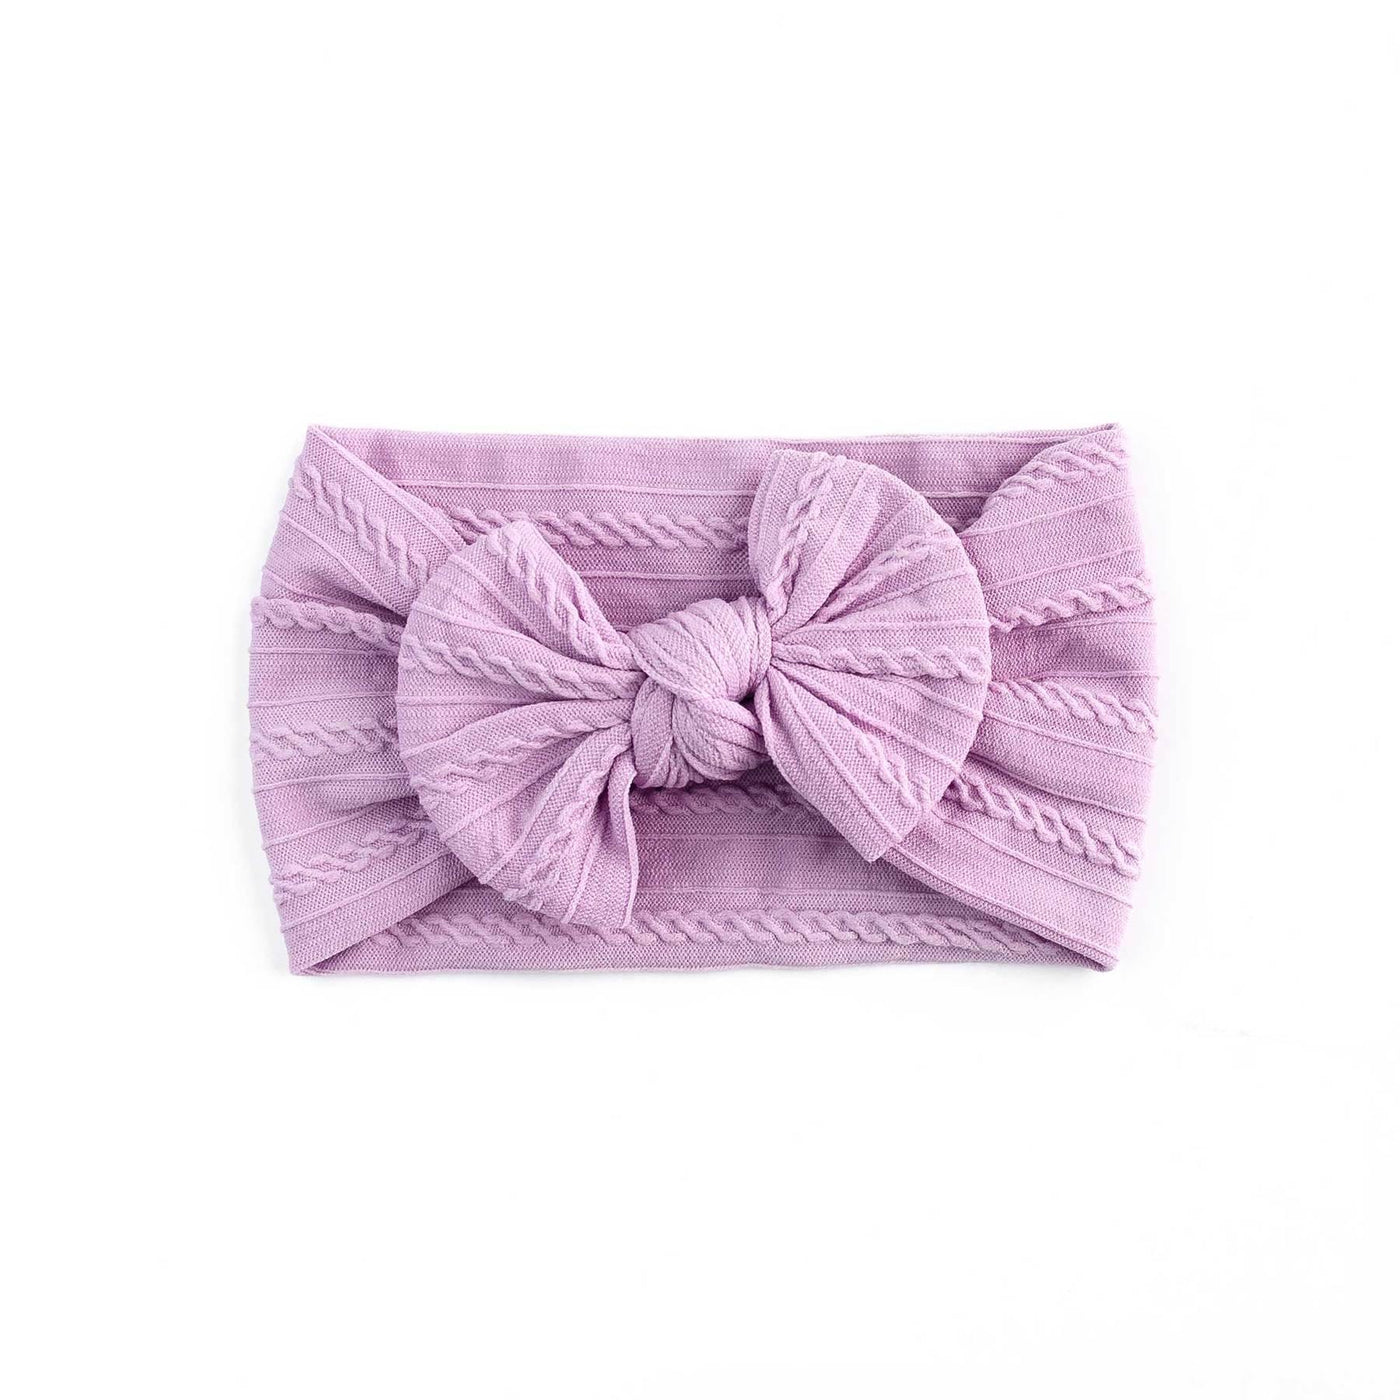 Cable Bow Headband - Violet - 